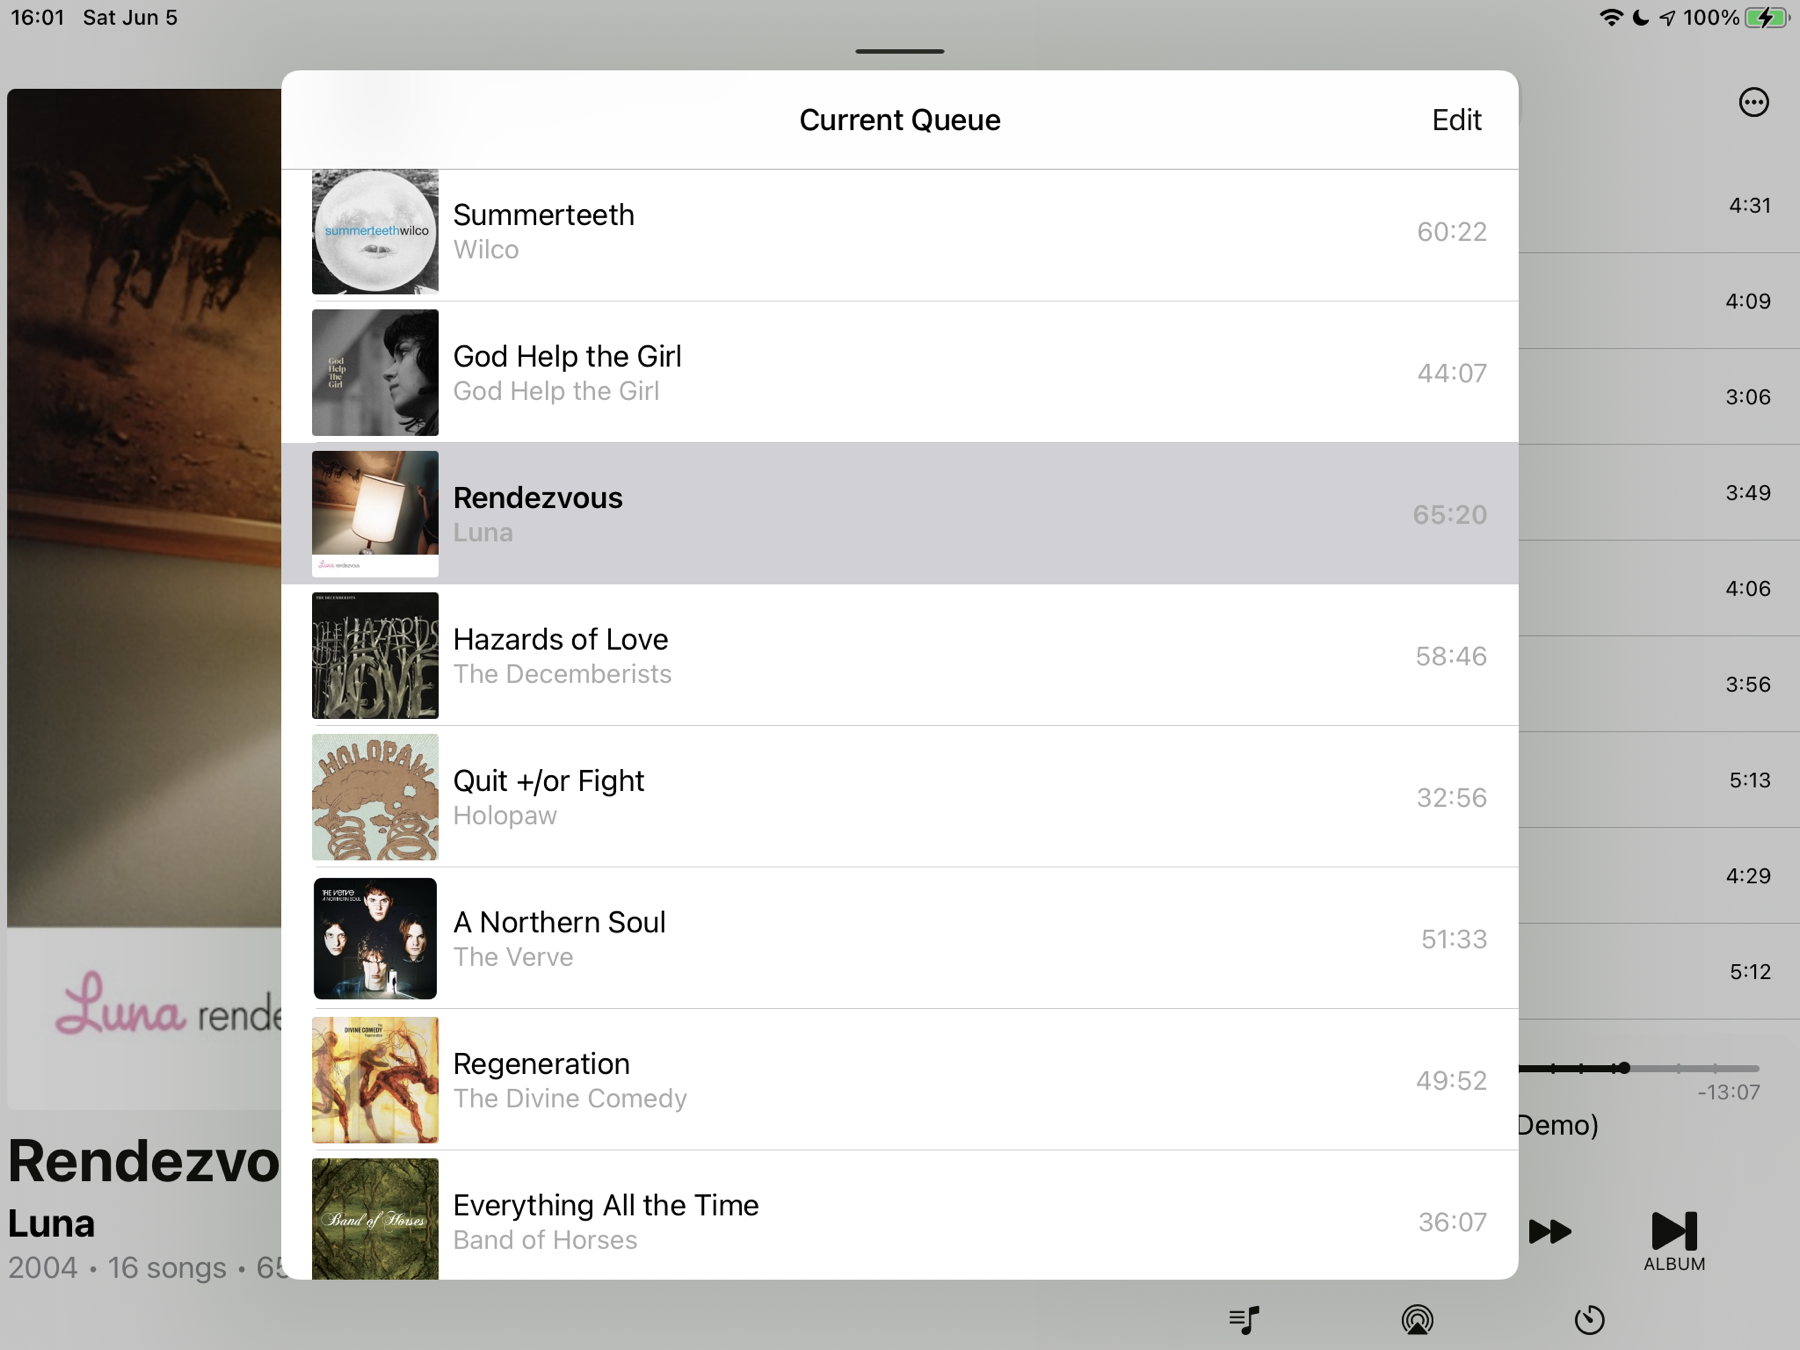 Albums app for iOS showing the queue as... albums. Lovely.